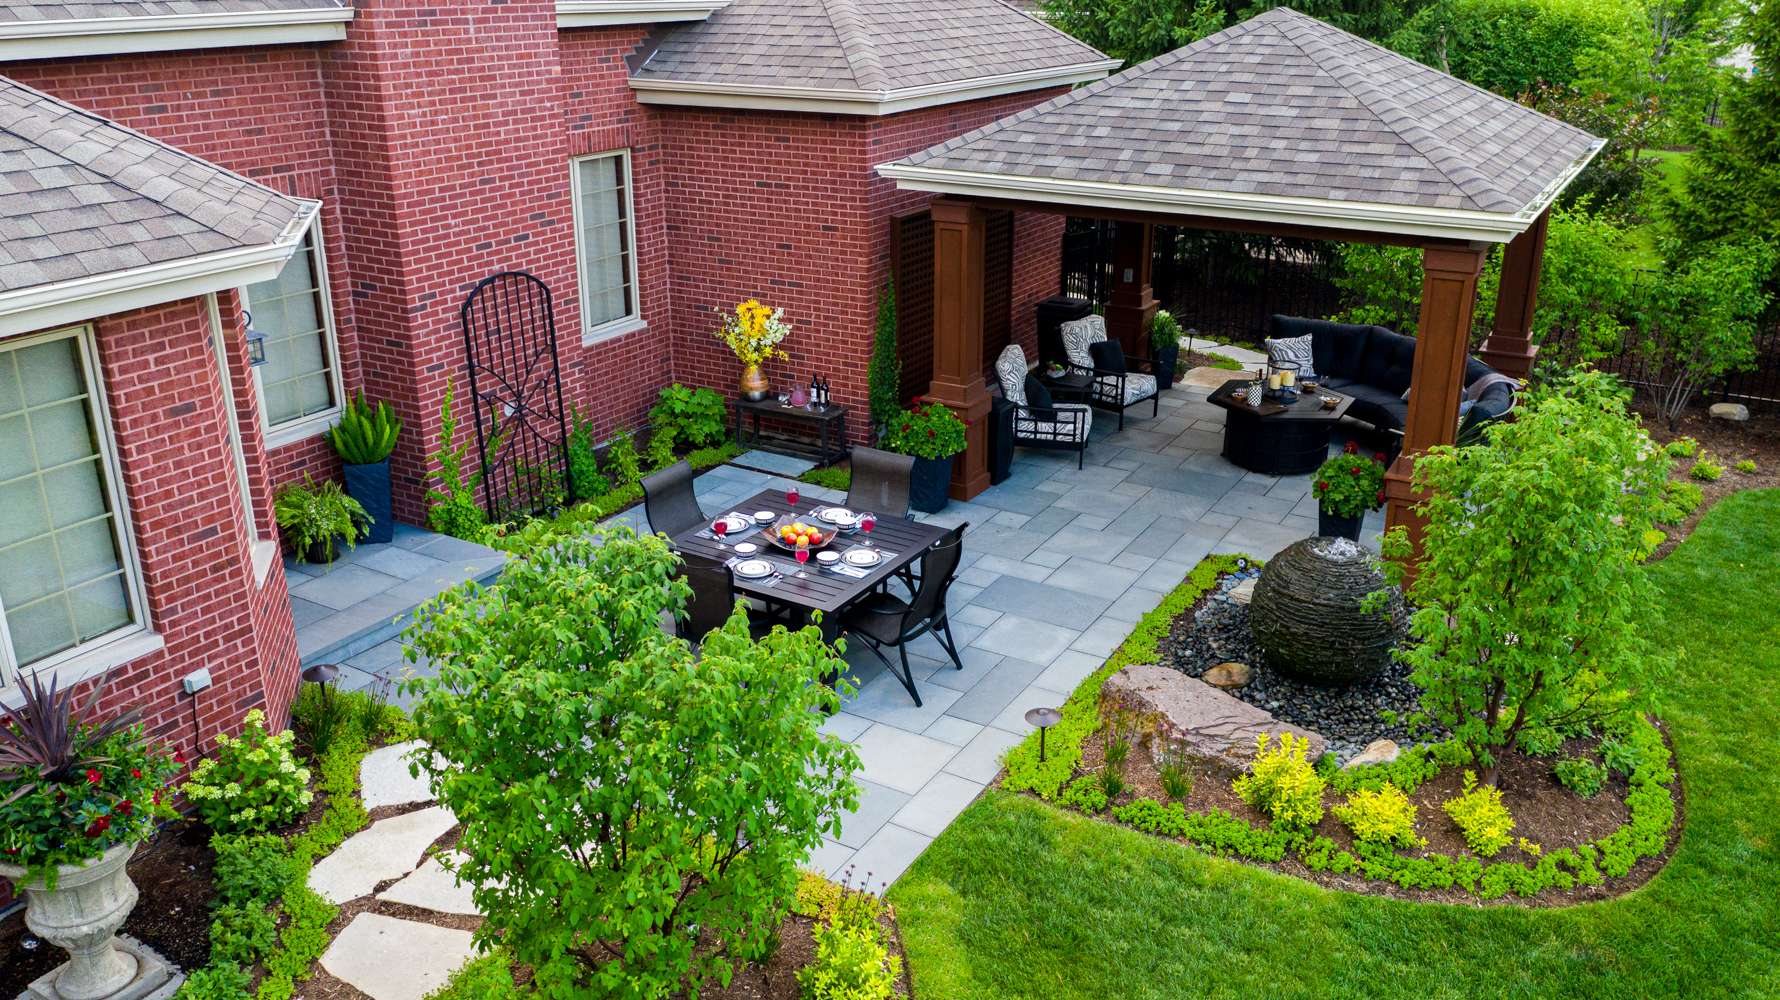 Backyard patio and pavilion for entertaining